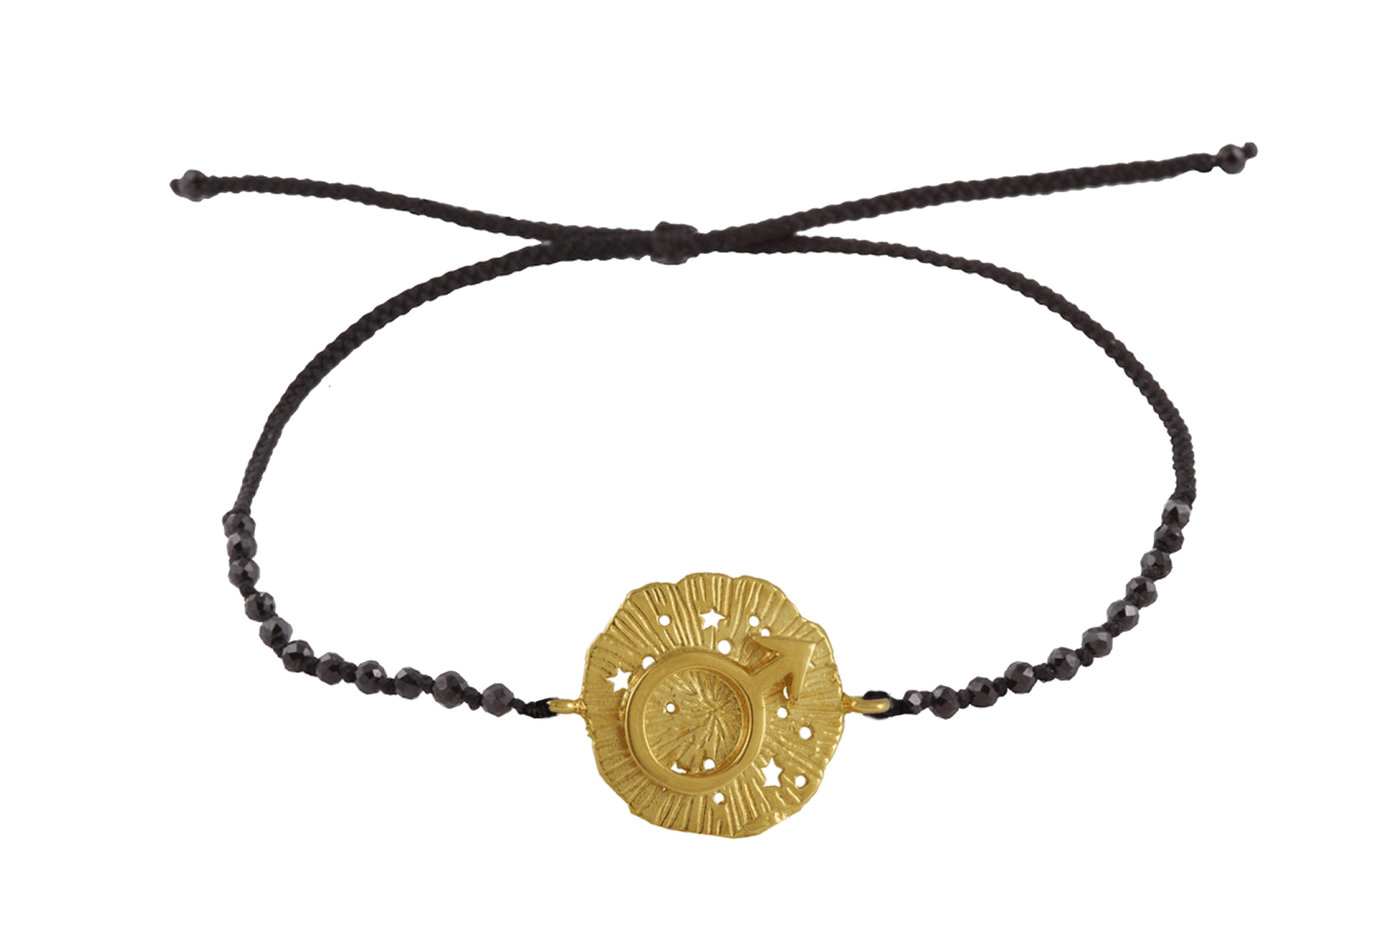 Mars Medallion Amulet bracelet with beads. Gold plated